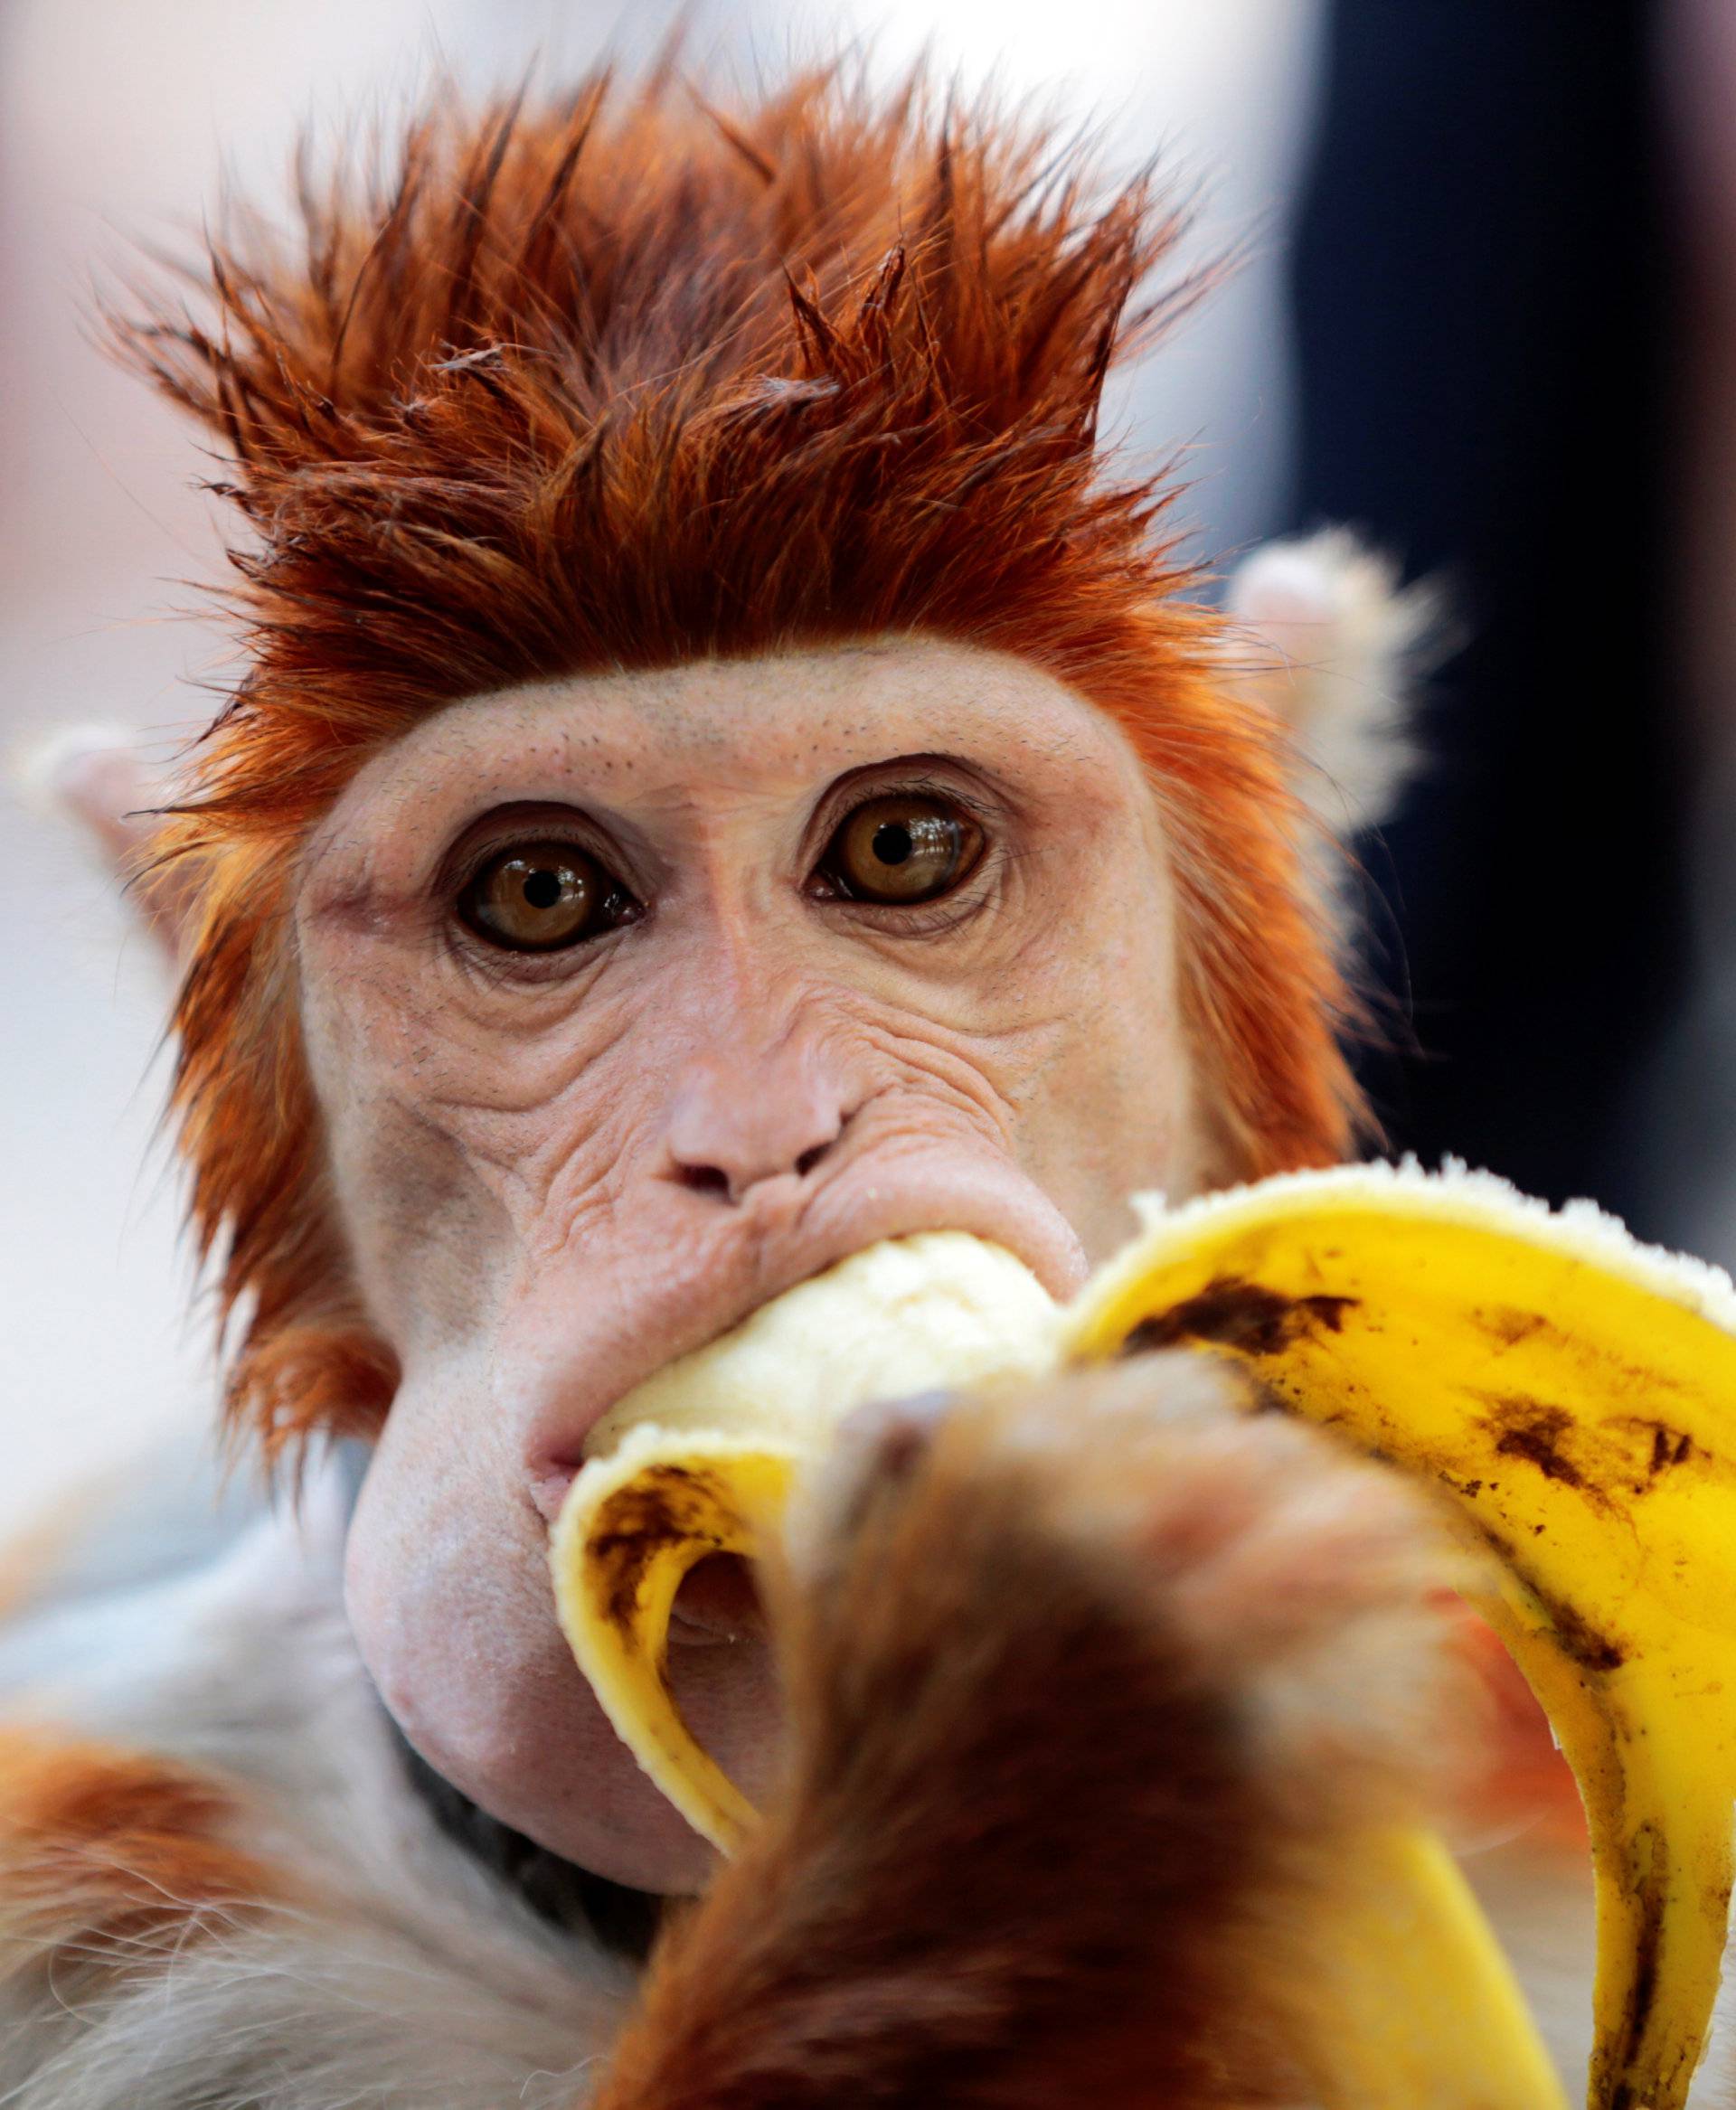 A monkey eats a banana as it takes a break from performing at a cultural center in Islamabad